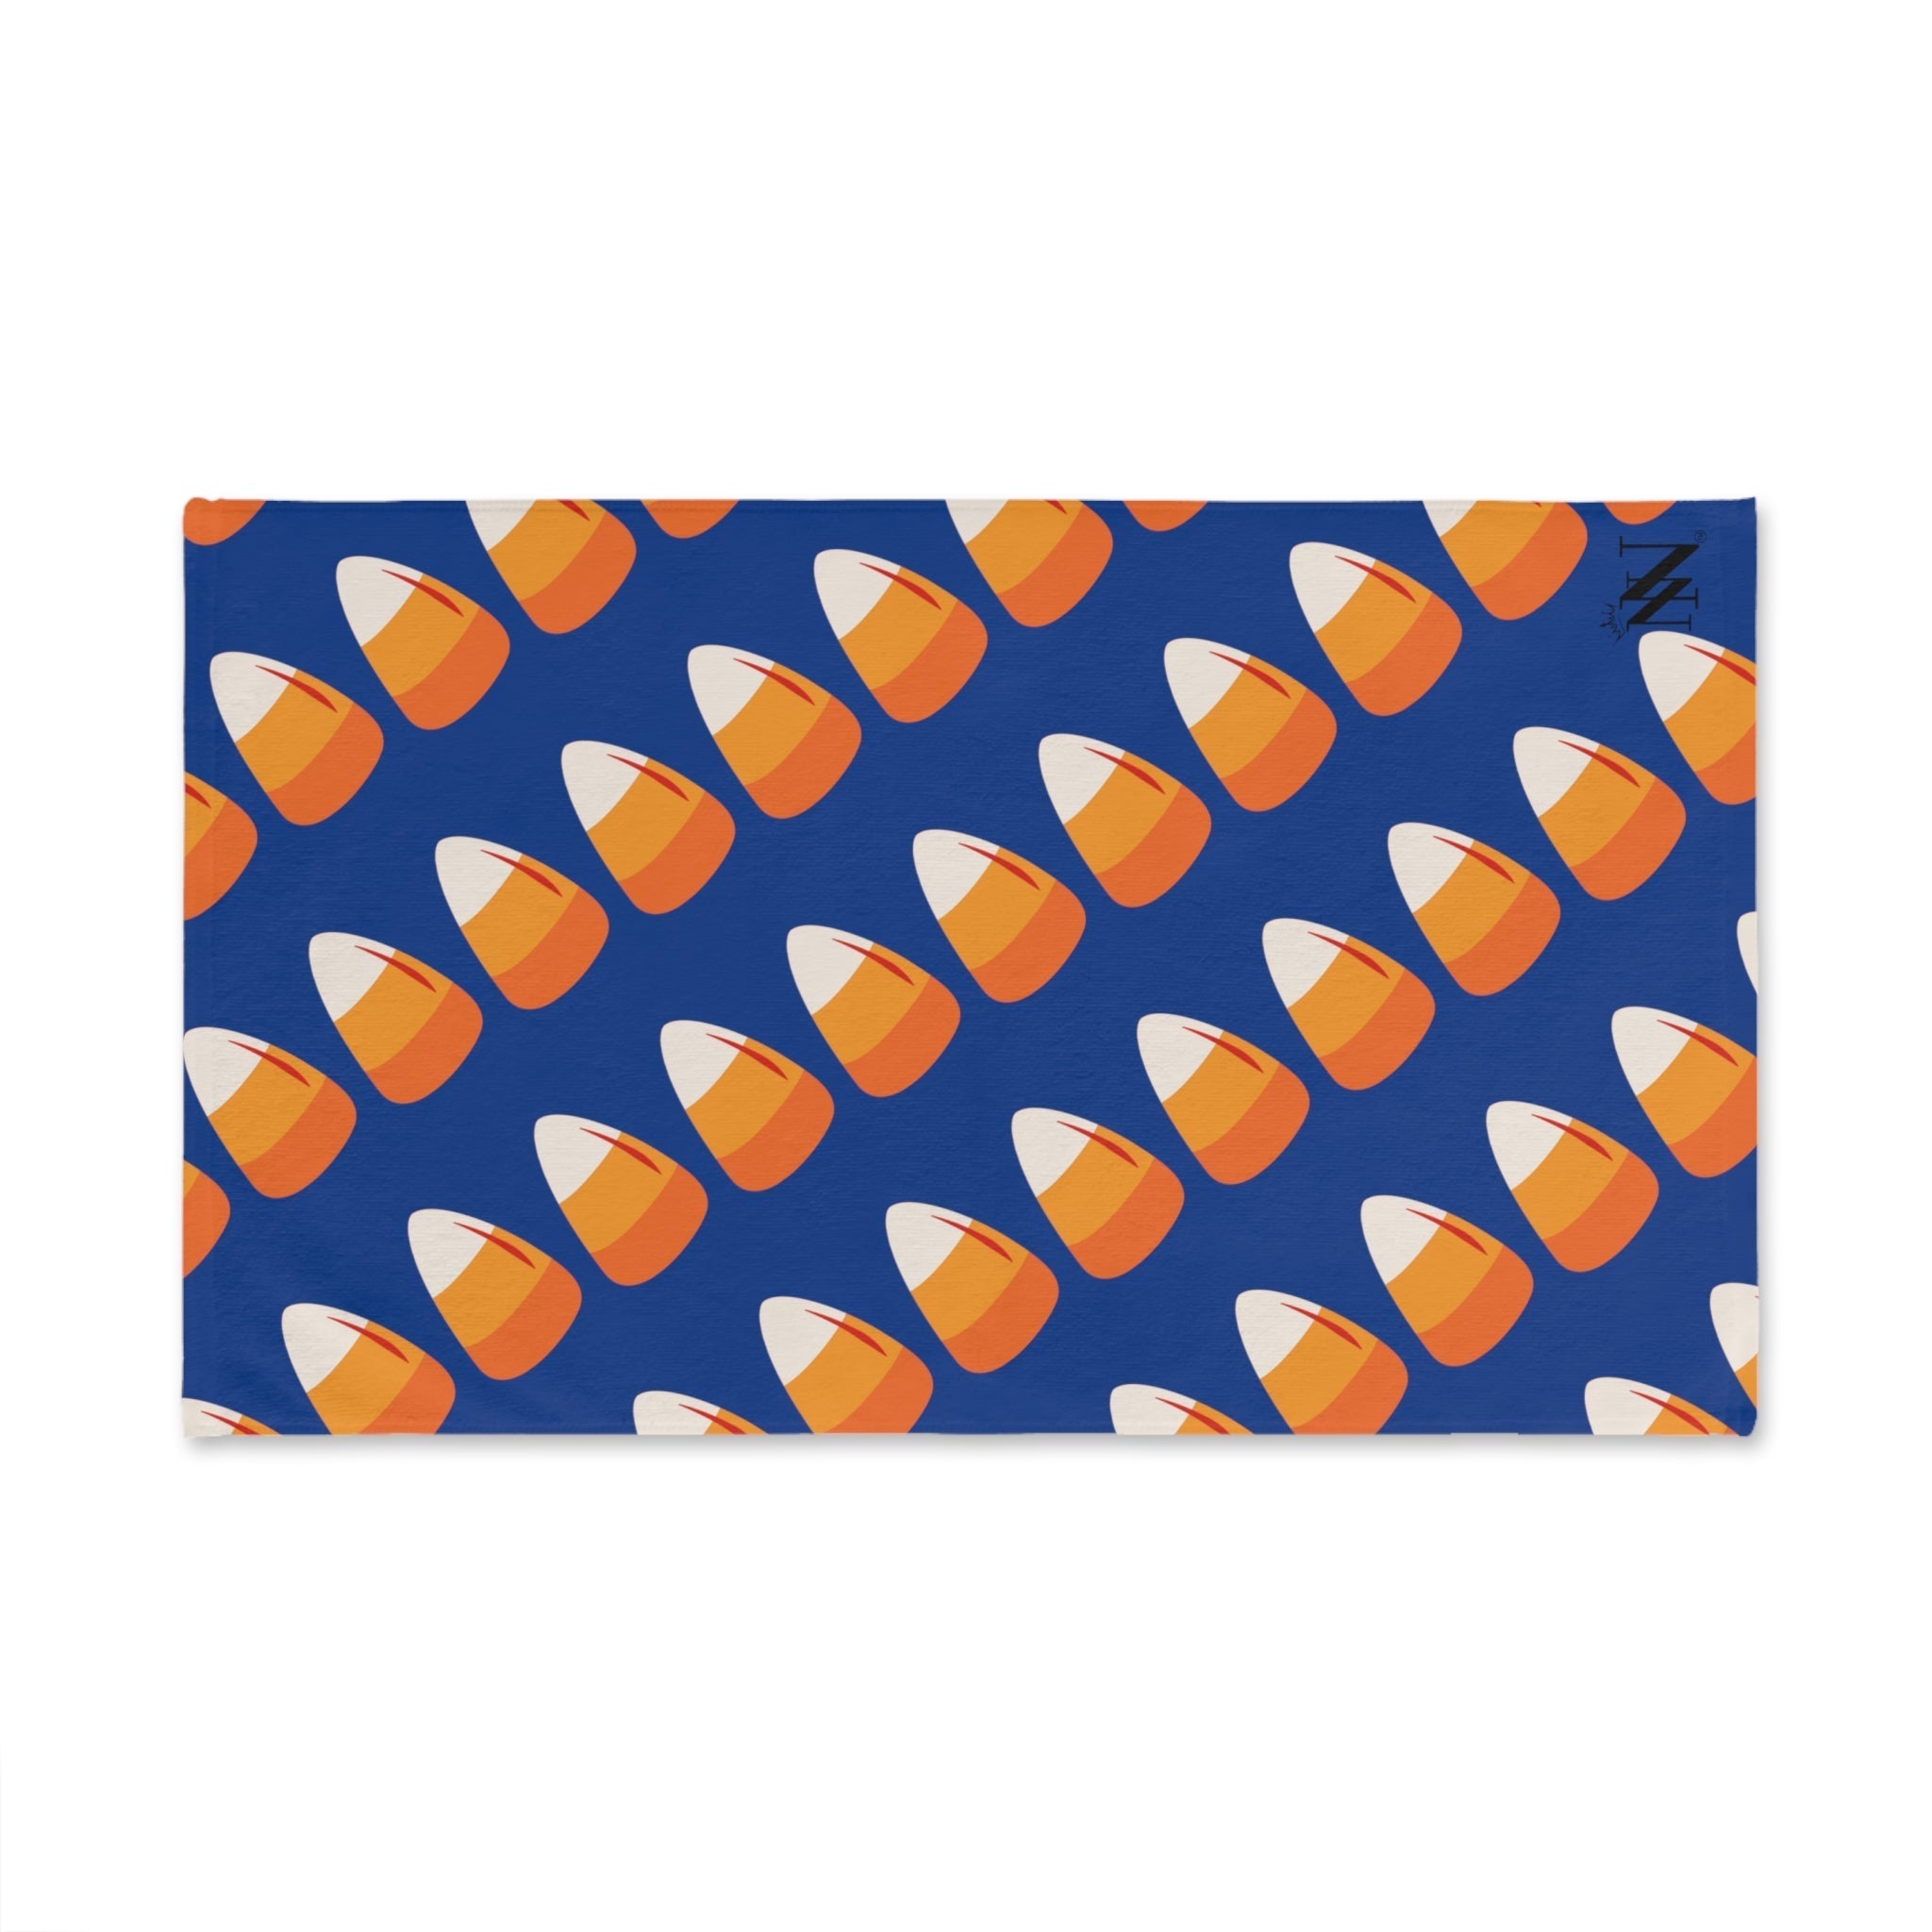 Candy Corn Blue | Gifts for Boyfriend, Funny Towel Romantic Gift for Wedding Couple Fiance First Year Anniversary Valentines, Party Gag Gifts, Joke Humor Cloth for Husband Men BF NECTAR NAPKINS